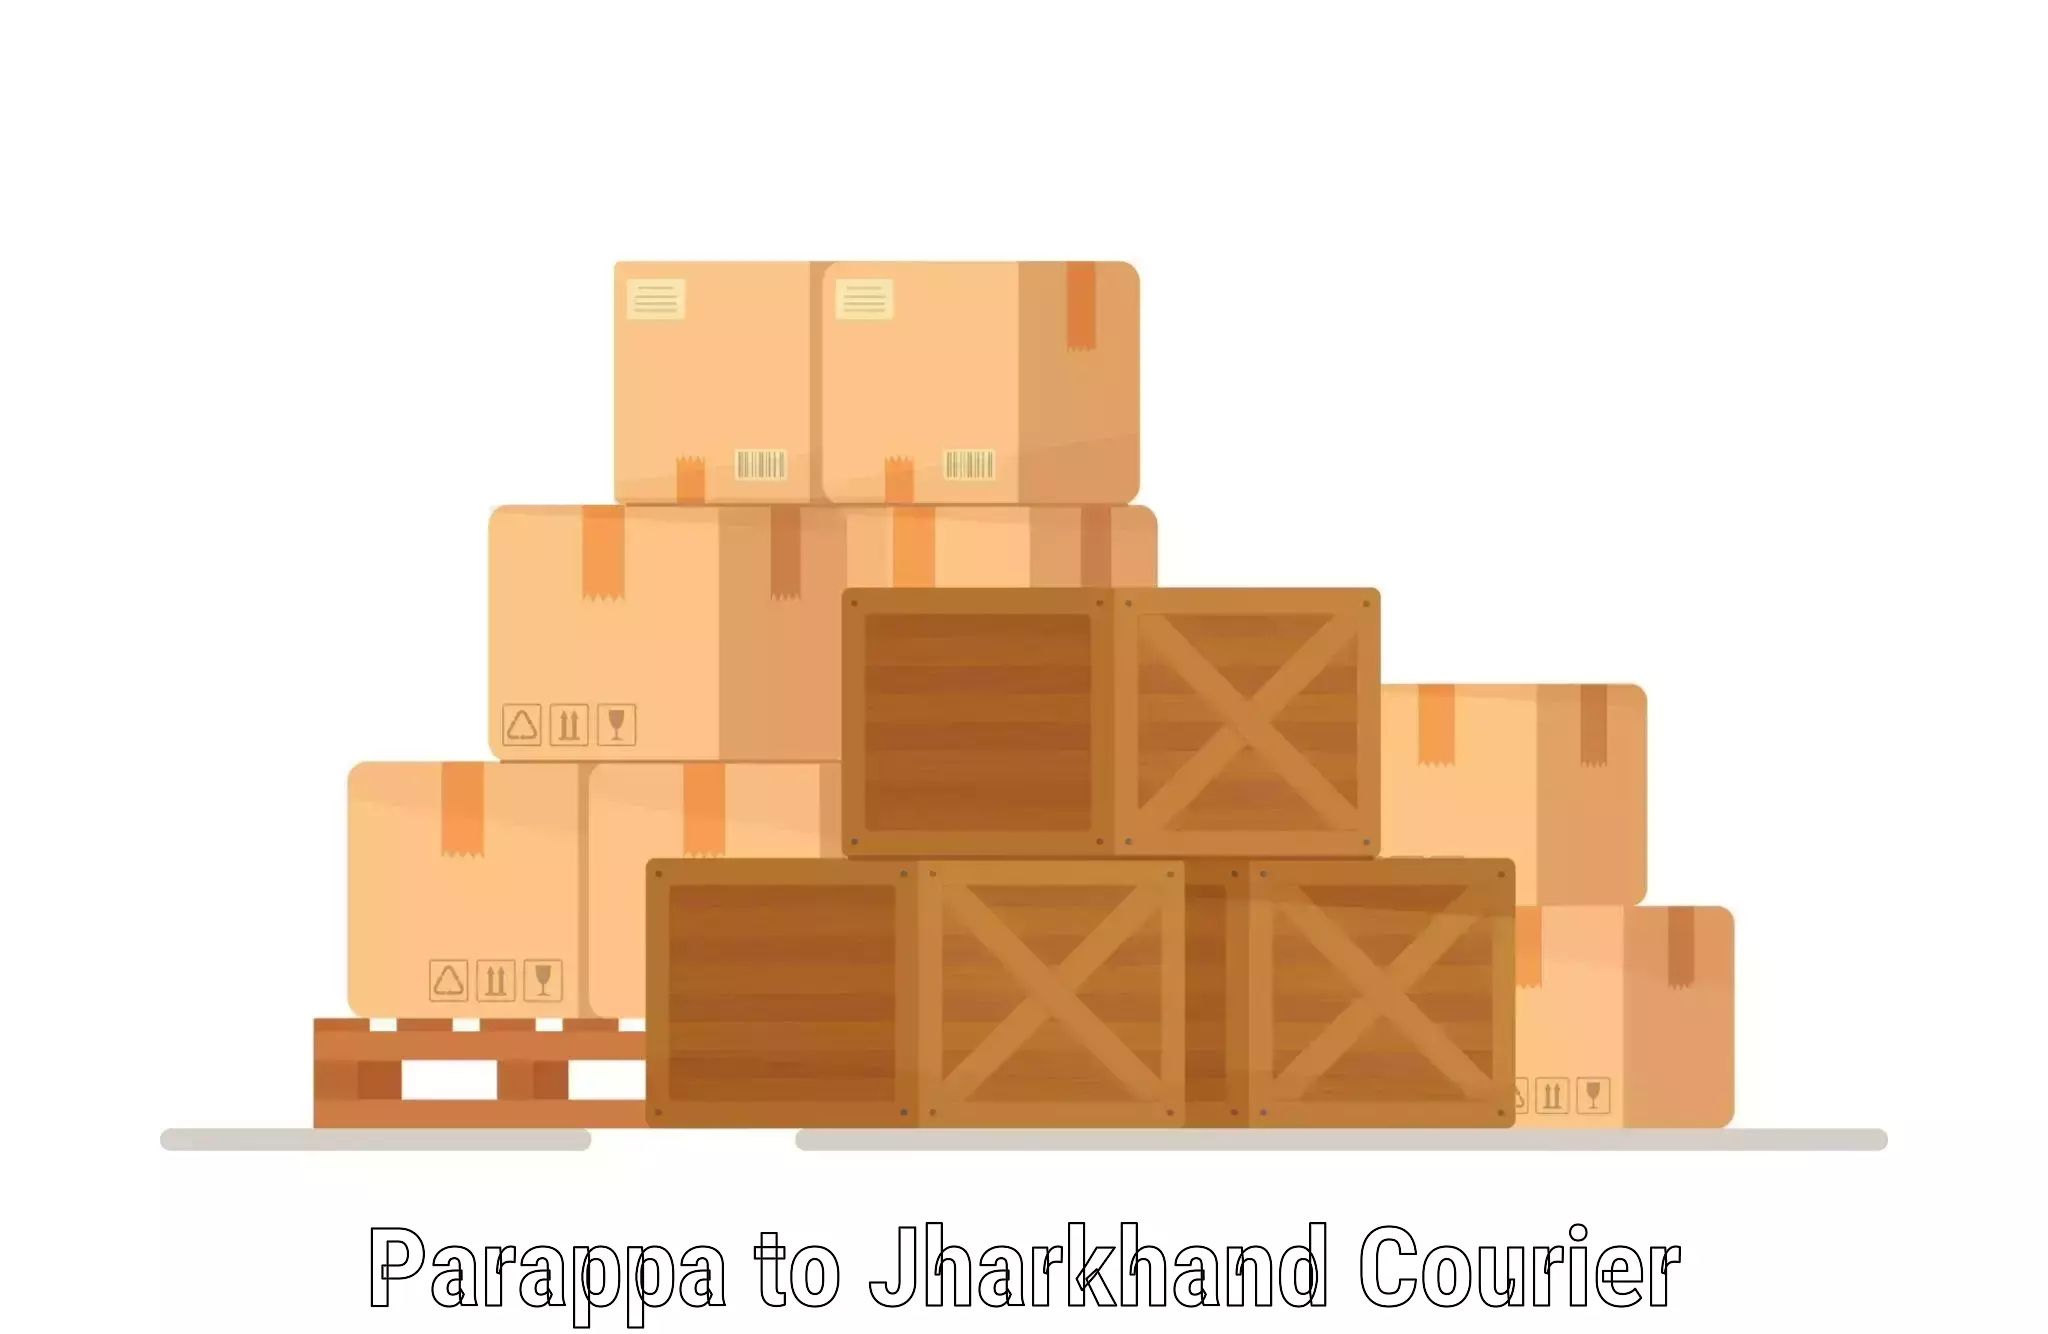 Nationwide courier service Parappa to Jharkhand